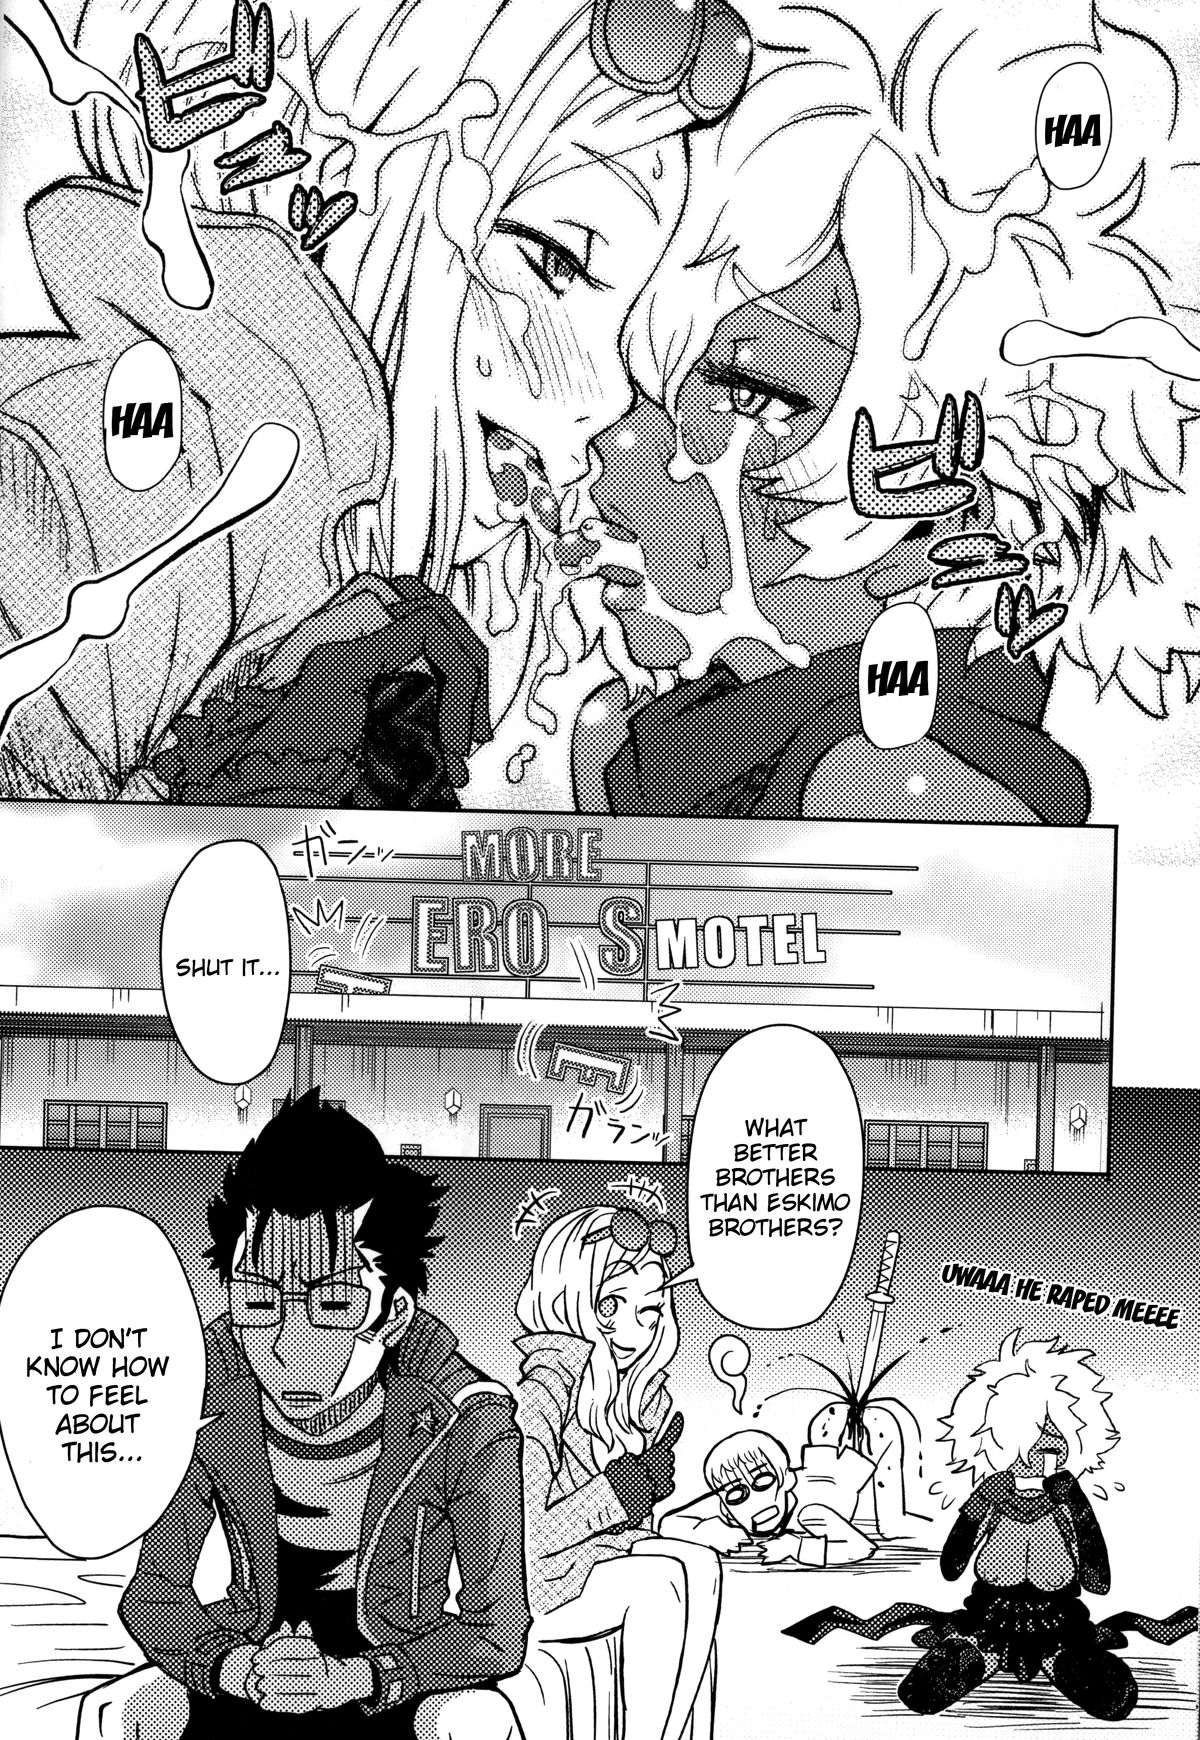 (C79) [Eight Beat (Itou Eight)] NO MORE HEROINES 2 (NO MORE HEROES) [English] {doujin-moe.us} page 23 full